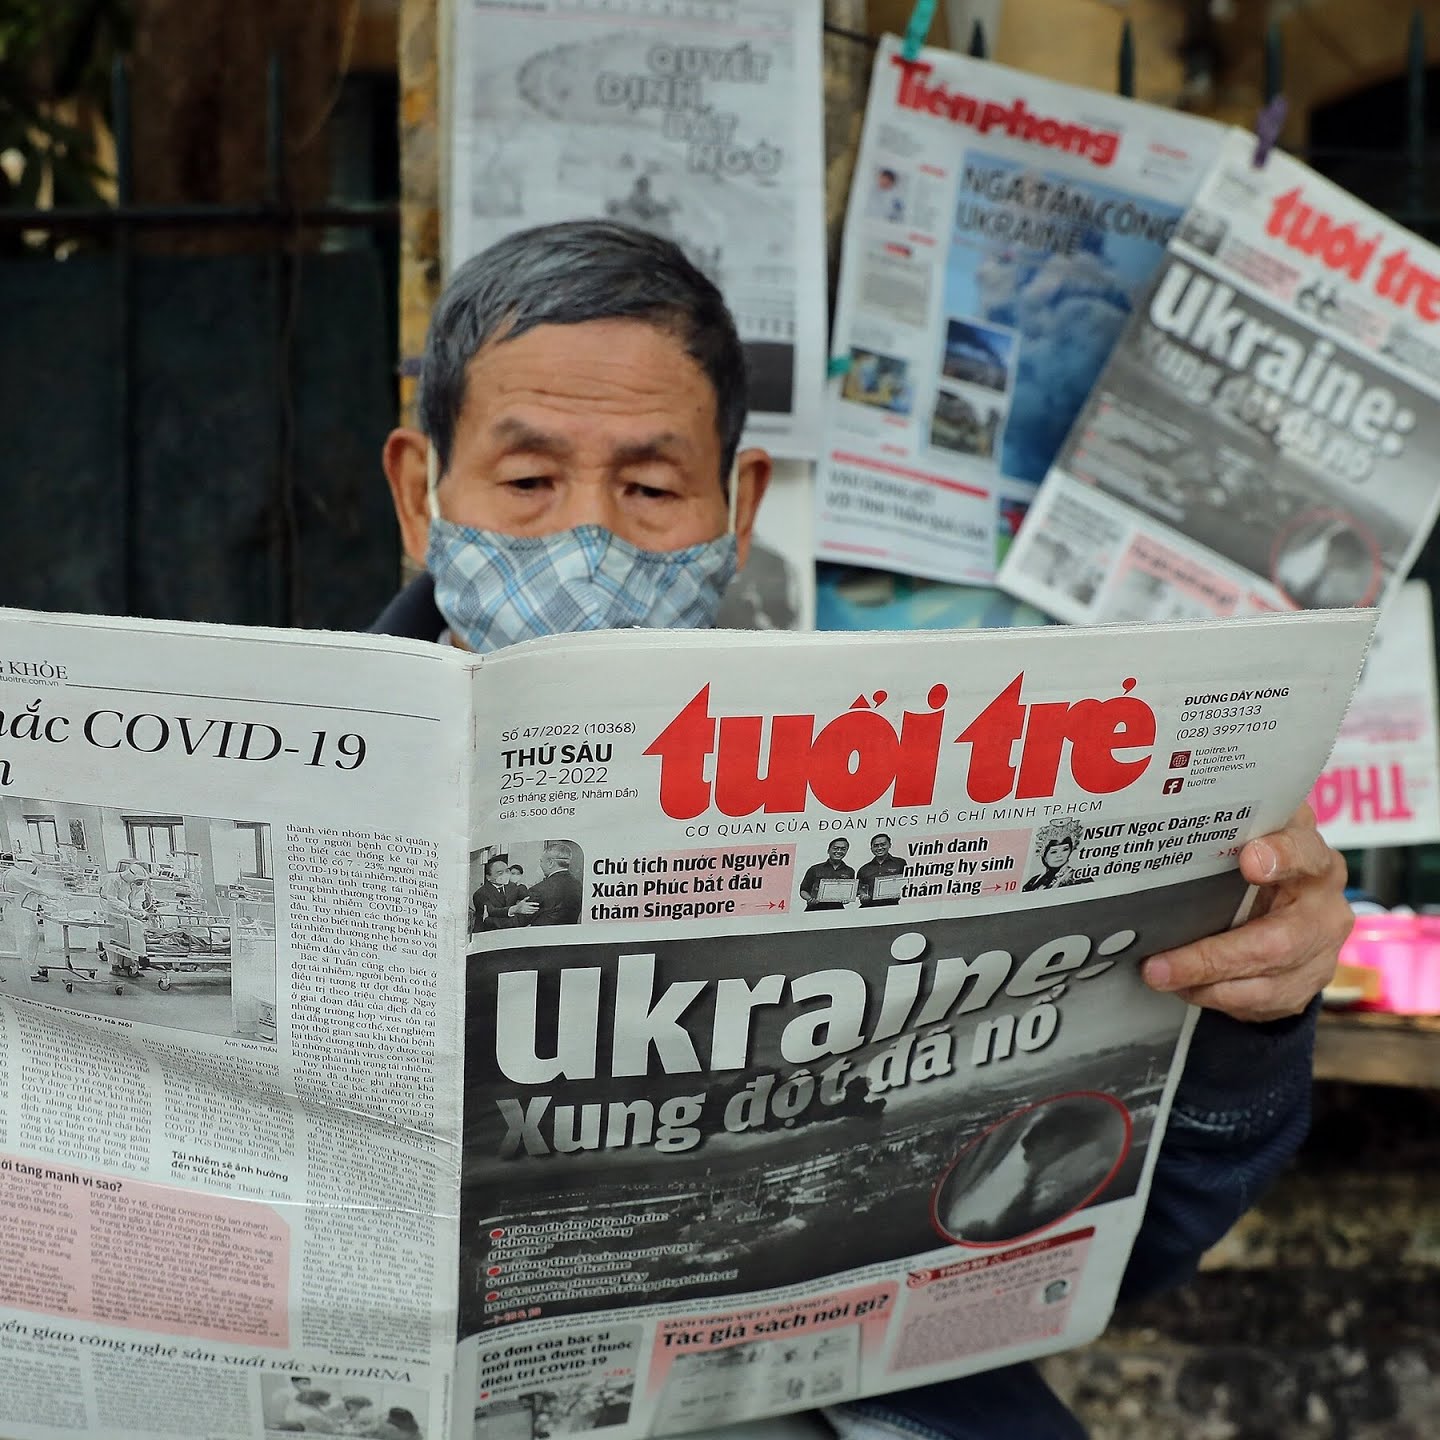 At a stall in Hanoi on Friday, a Vietnamese newspaper had a front-page story on the Russian invasion of Ukraine.